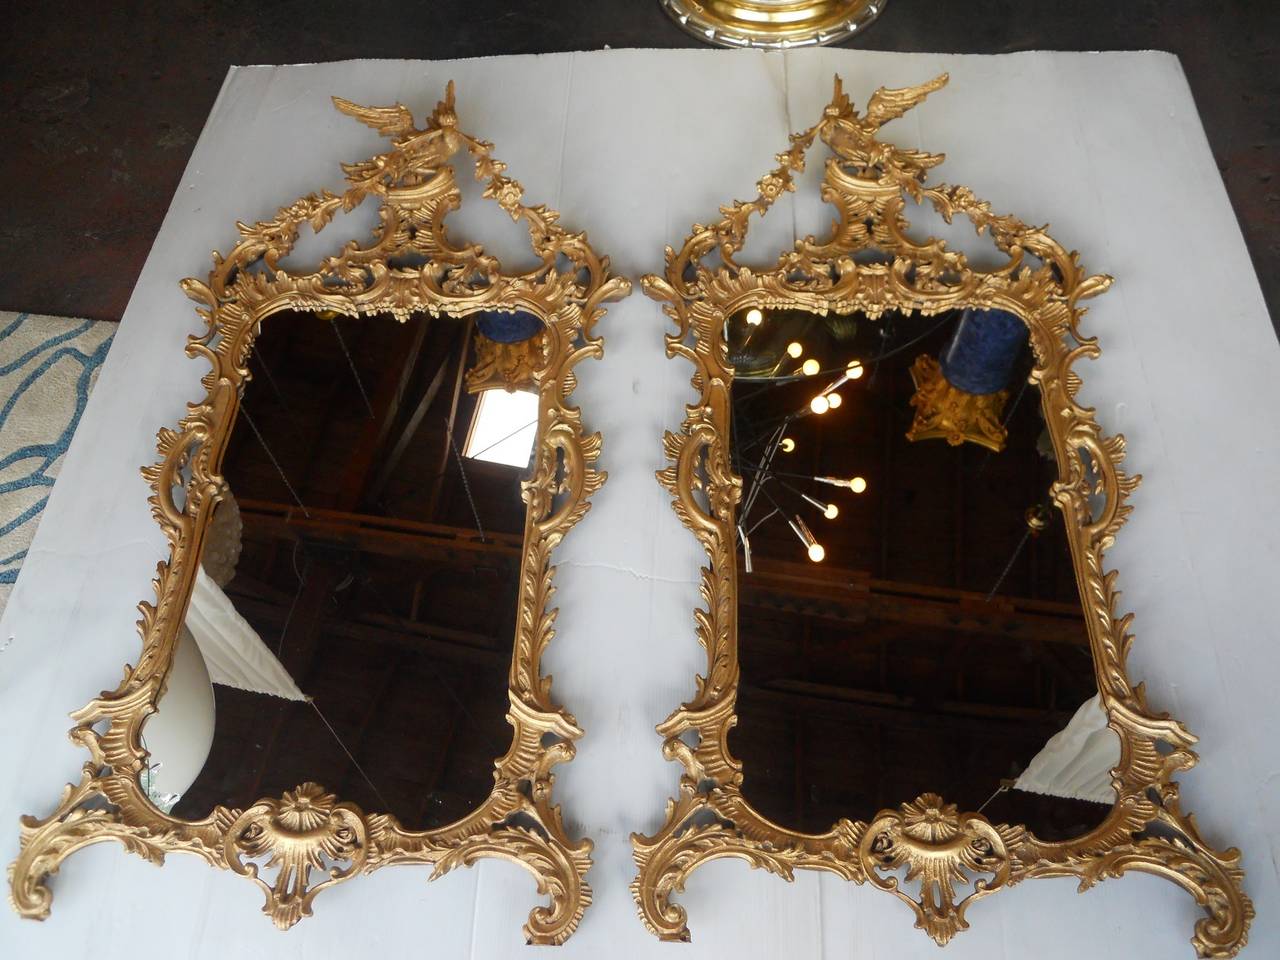 Extraordinary pair of Chippendale style mirrors surmounted by a spread eagle bearing rose flower swags in its beak above an arched cornice,
Hand-carved wood and gold leaf finish.